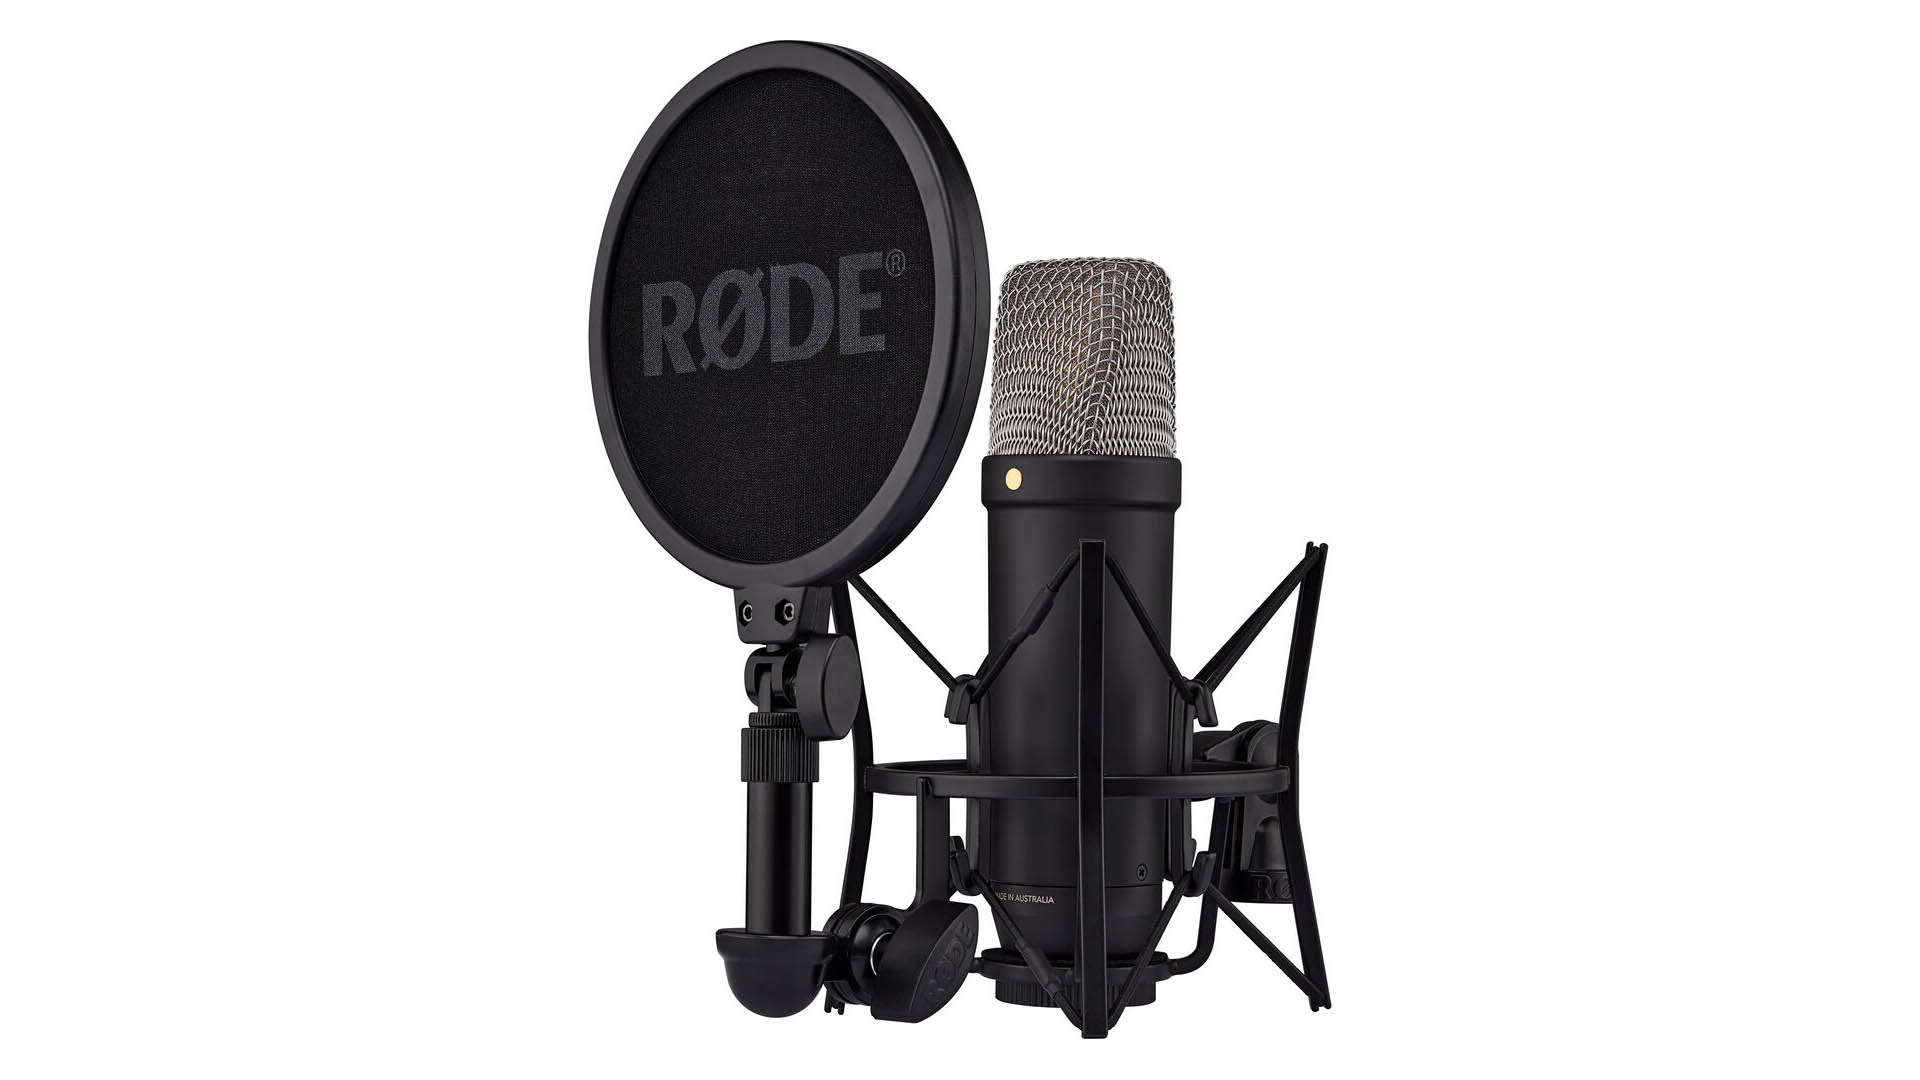 RODE NT1 5th Generation Large-Diaphragm Cardioid Condenser XLR/USB  Microphone (Silver)